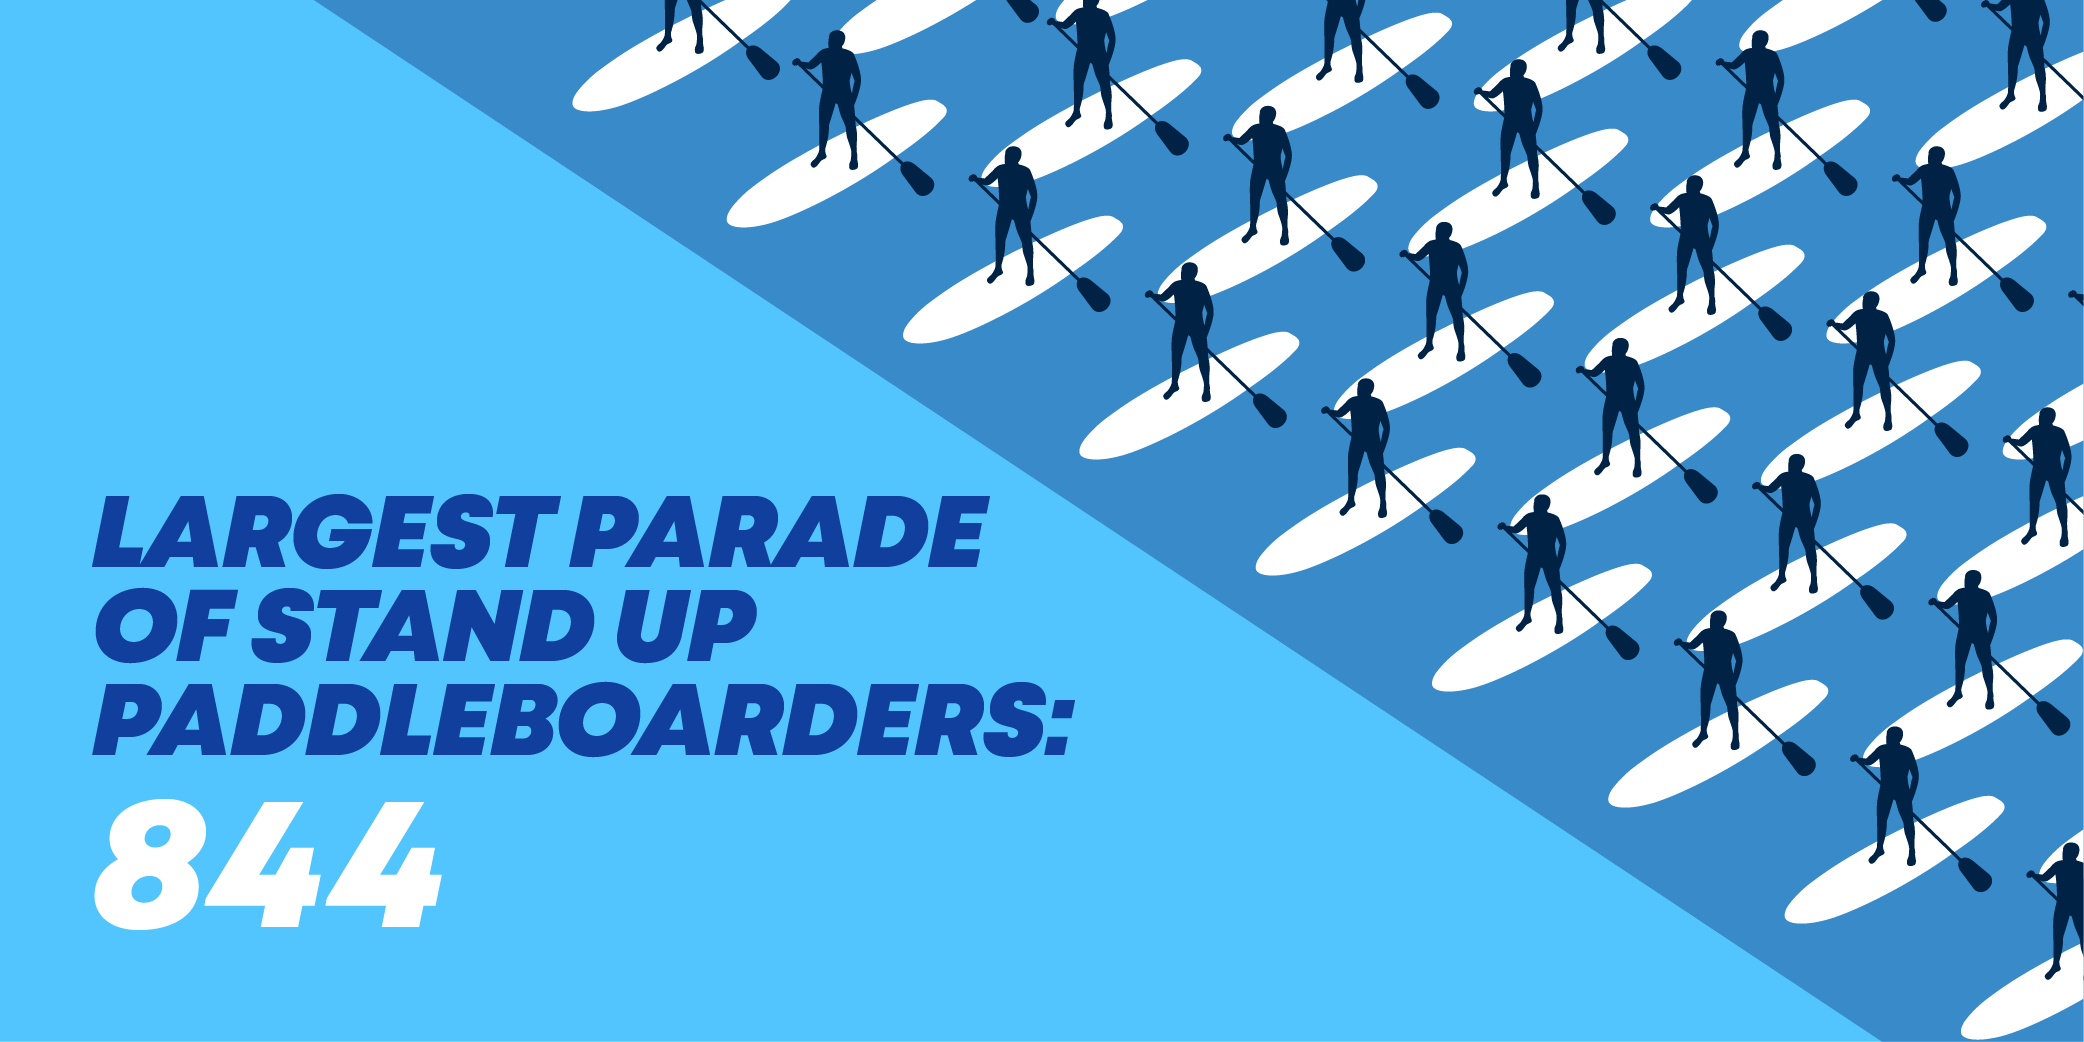 graphic about the largest parade of paddle boarders